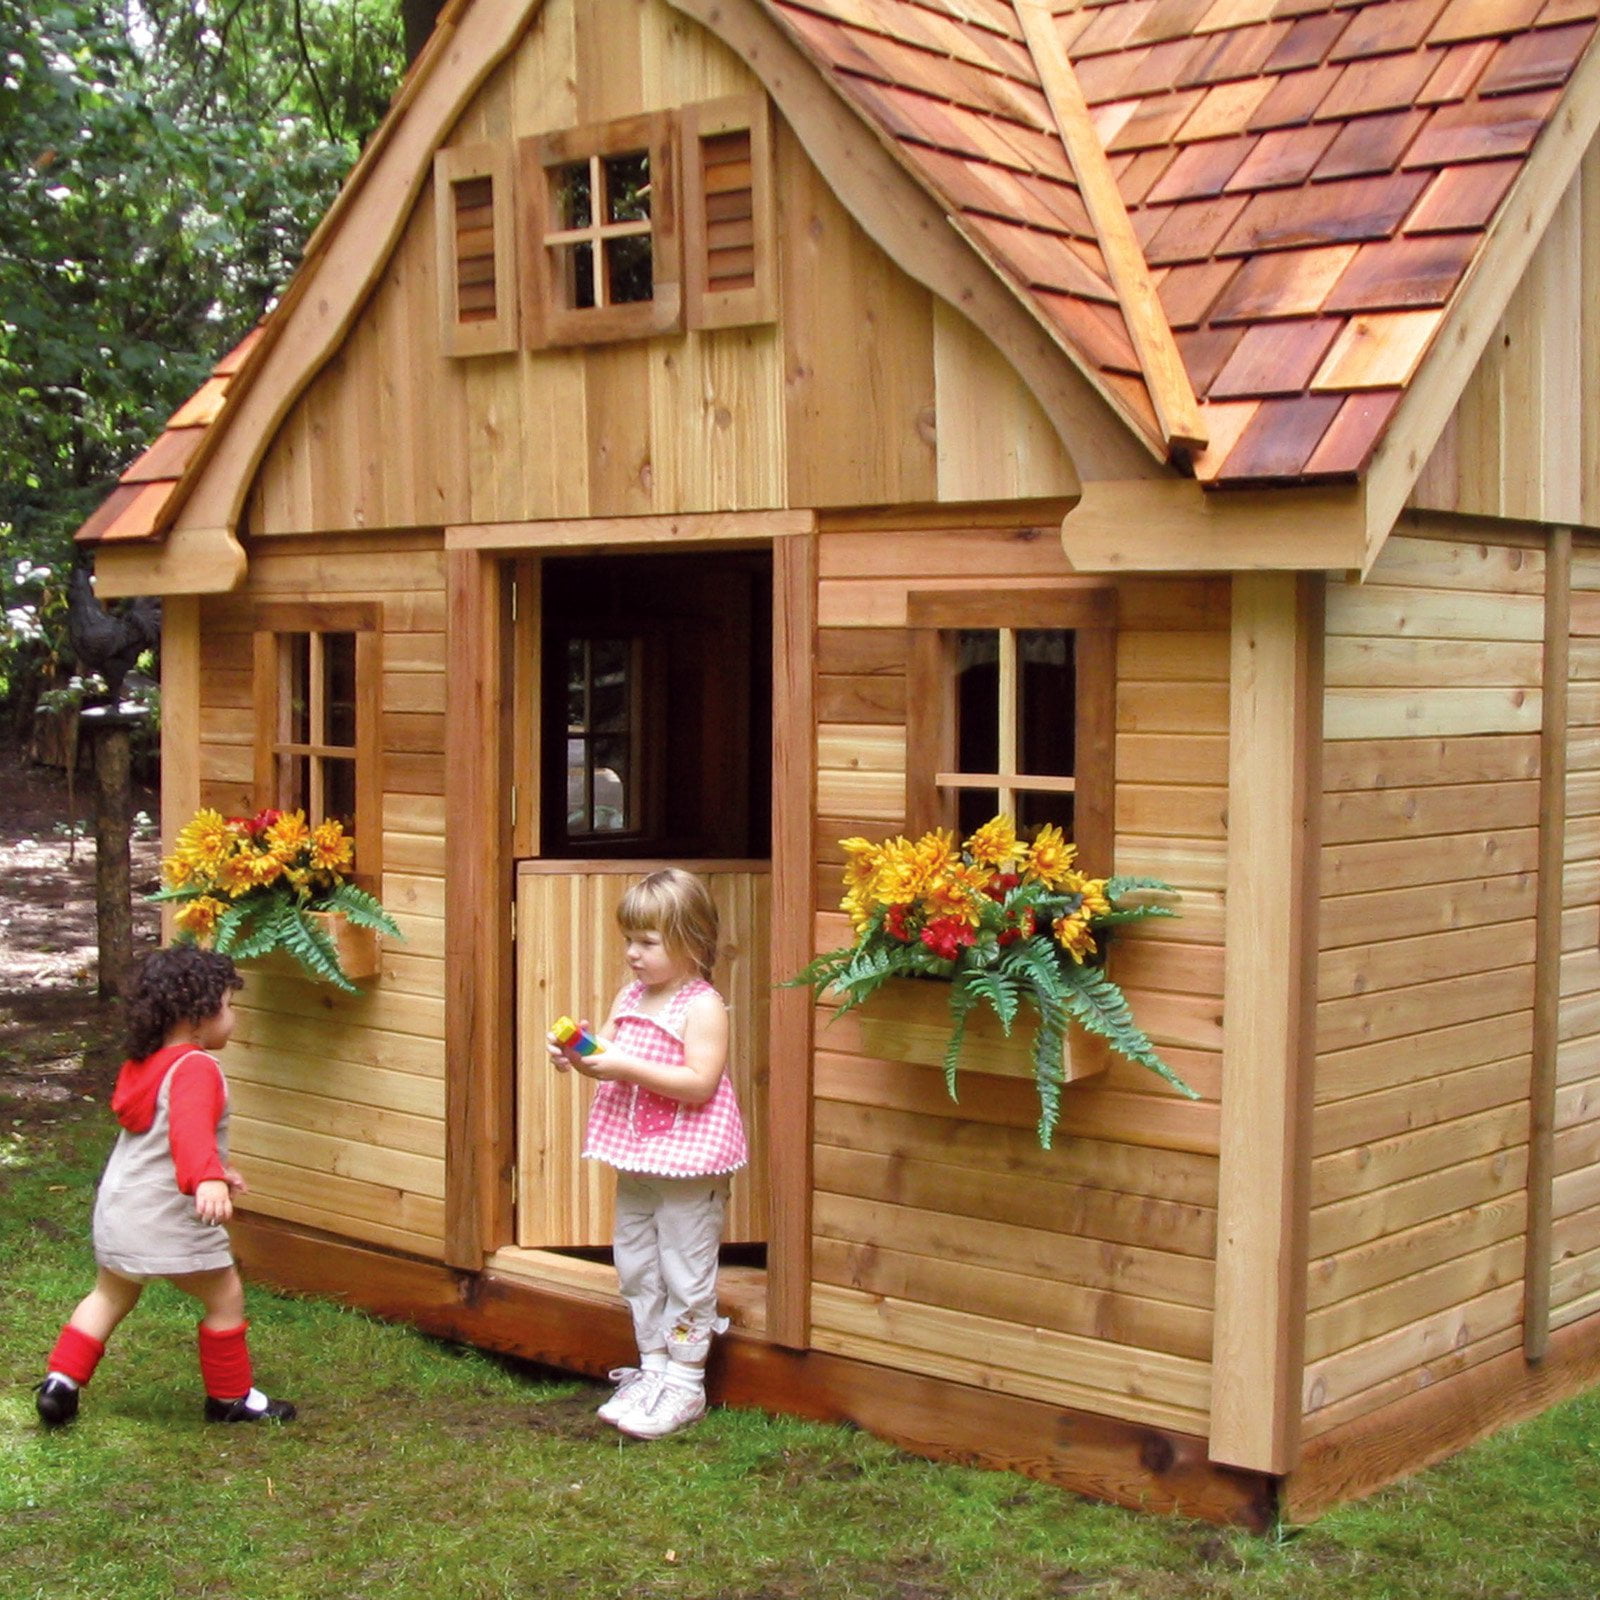 +65 Big Backyard Bayberry Ready-to-assemble Wooden Playhouse | Home Decor